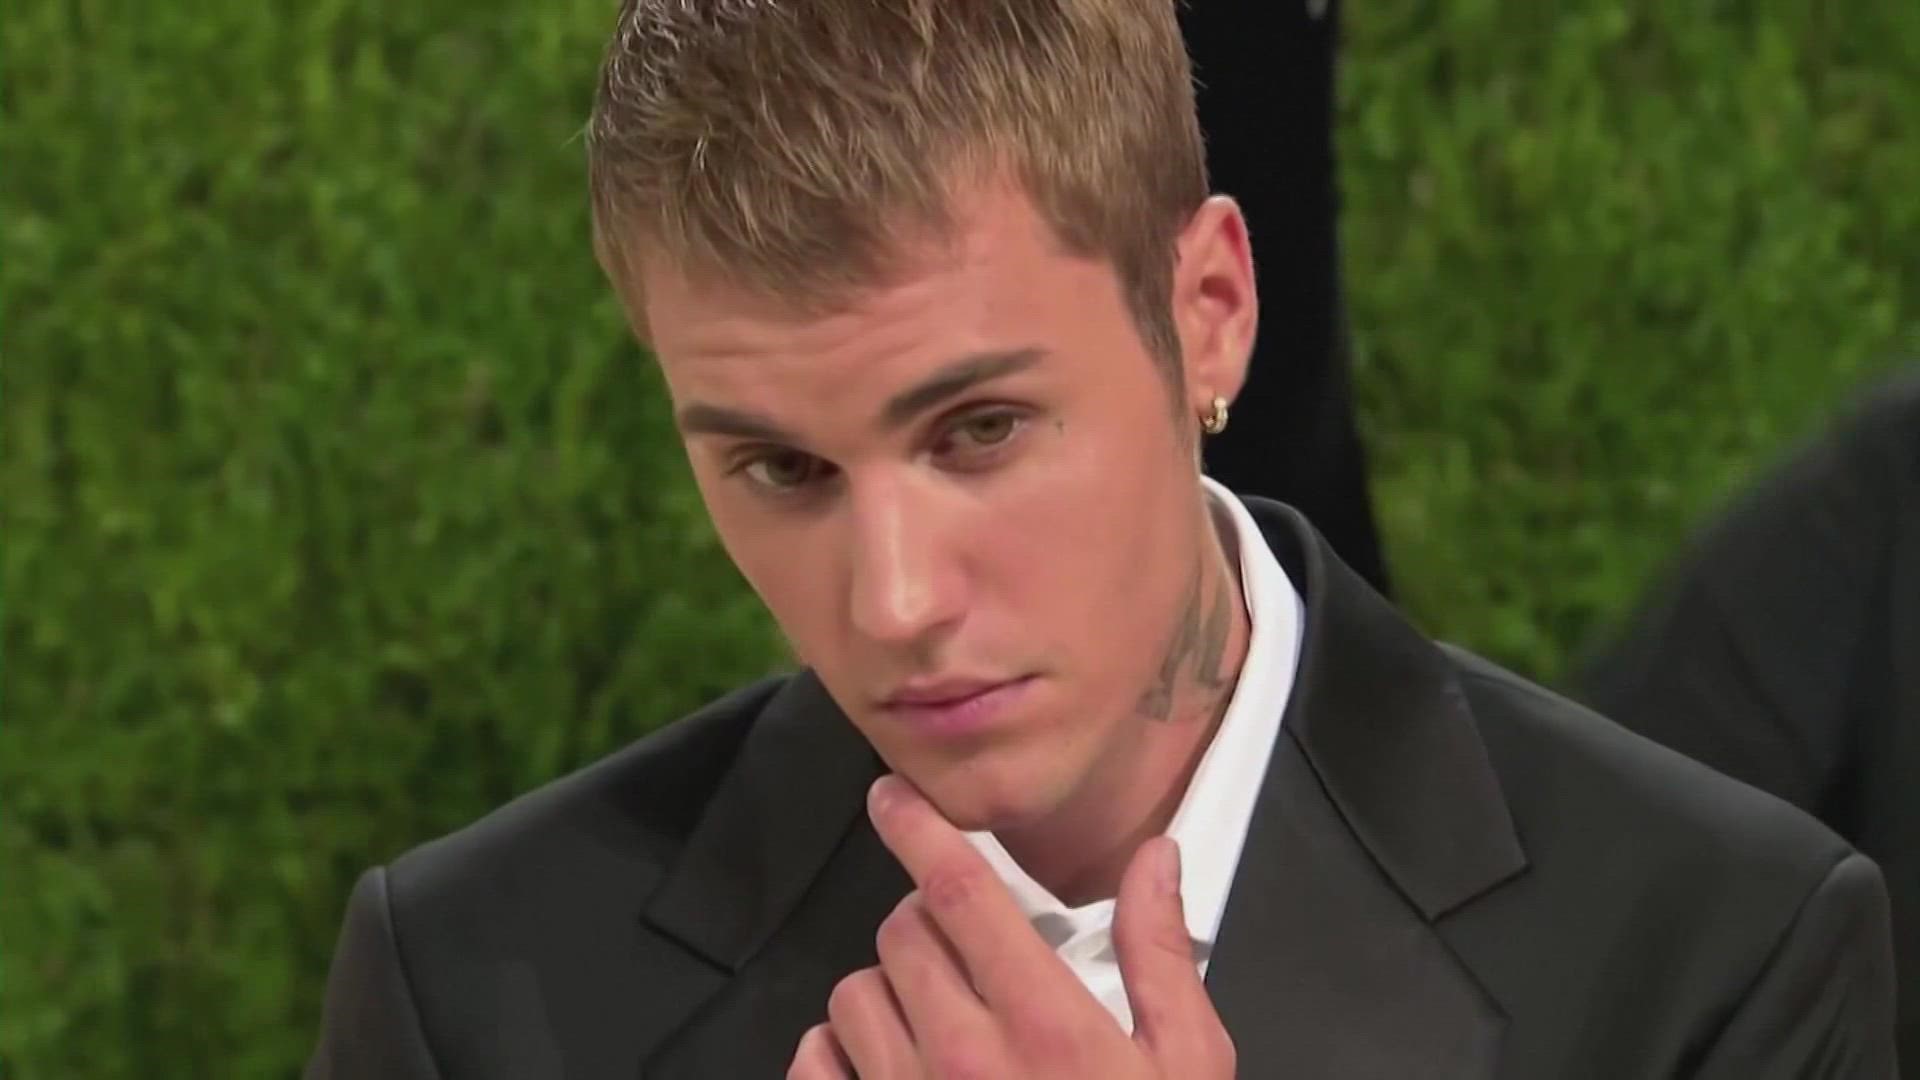 Singer-songwriter Justin Bieber announced he has contracted a serious complication from a recent virus that has paralyzed the right side of his face completely.